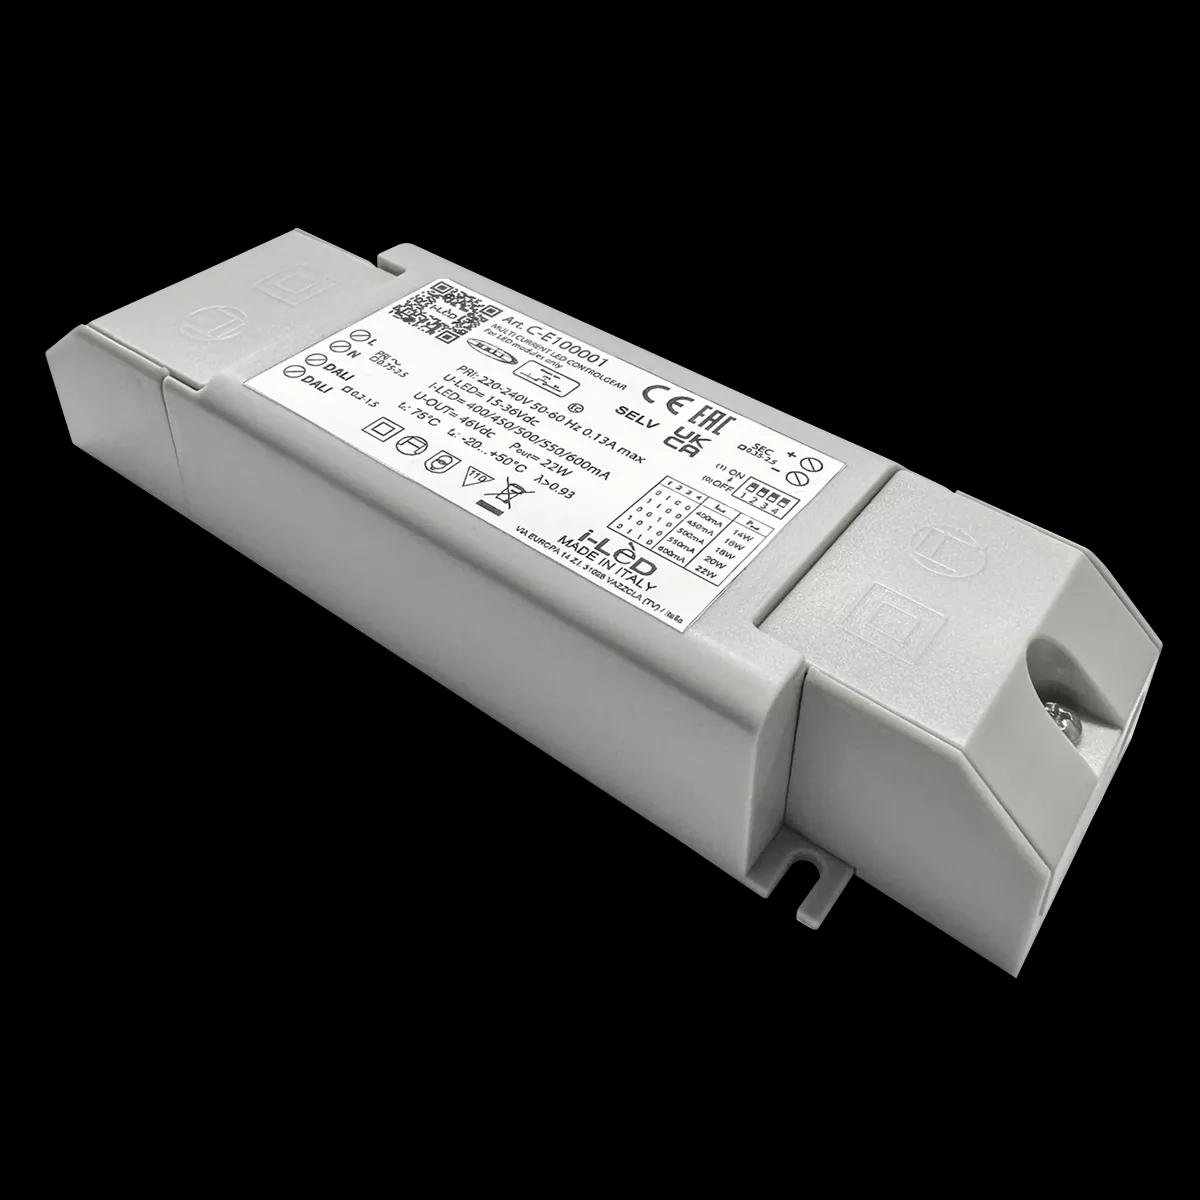 Argo_PRO - DALI2 Push and Simply 700mA 15-36V 25W |  Push and Simply Dim  Controller